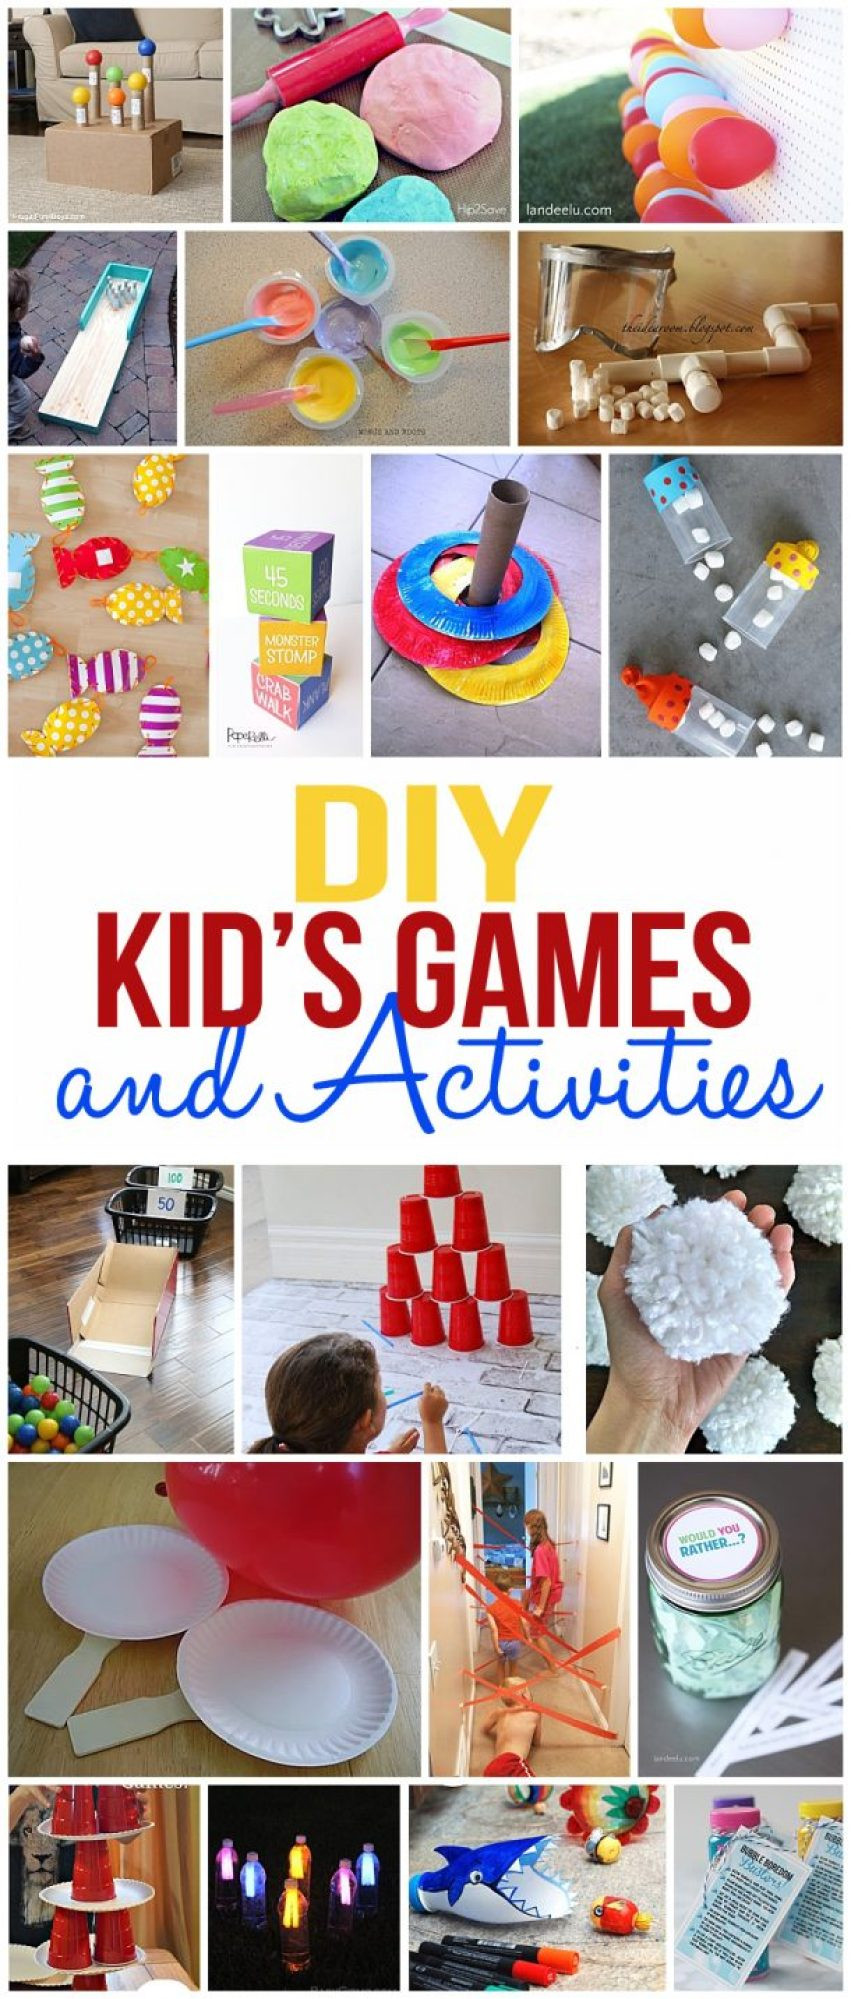 DIY Projects For Kids
 DIY Kids Games and Activities for Indoors or Outdoors